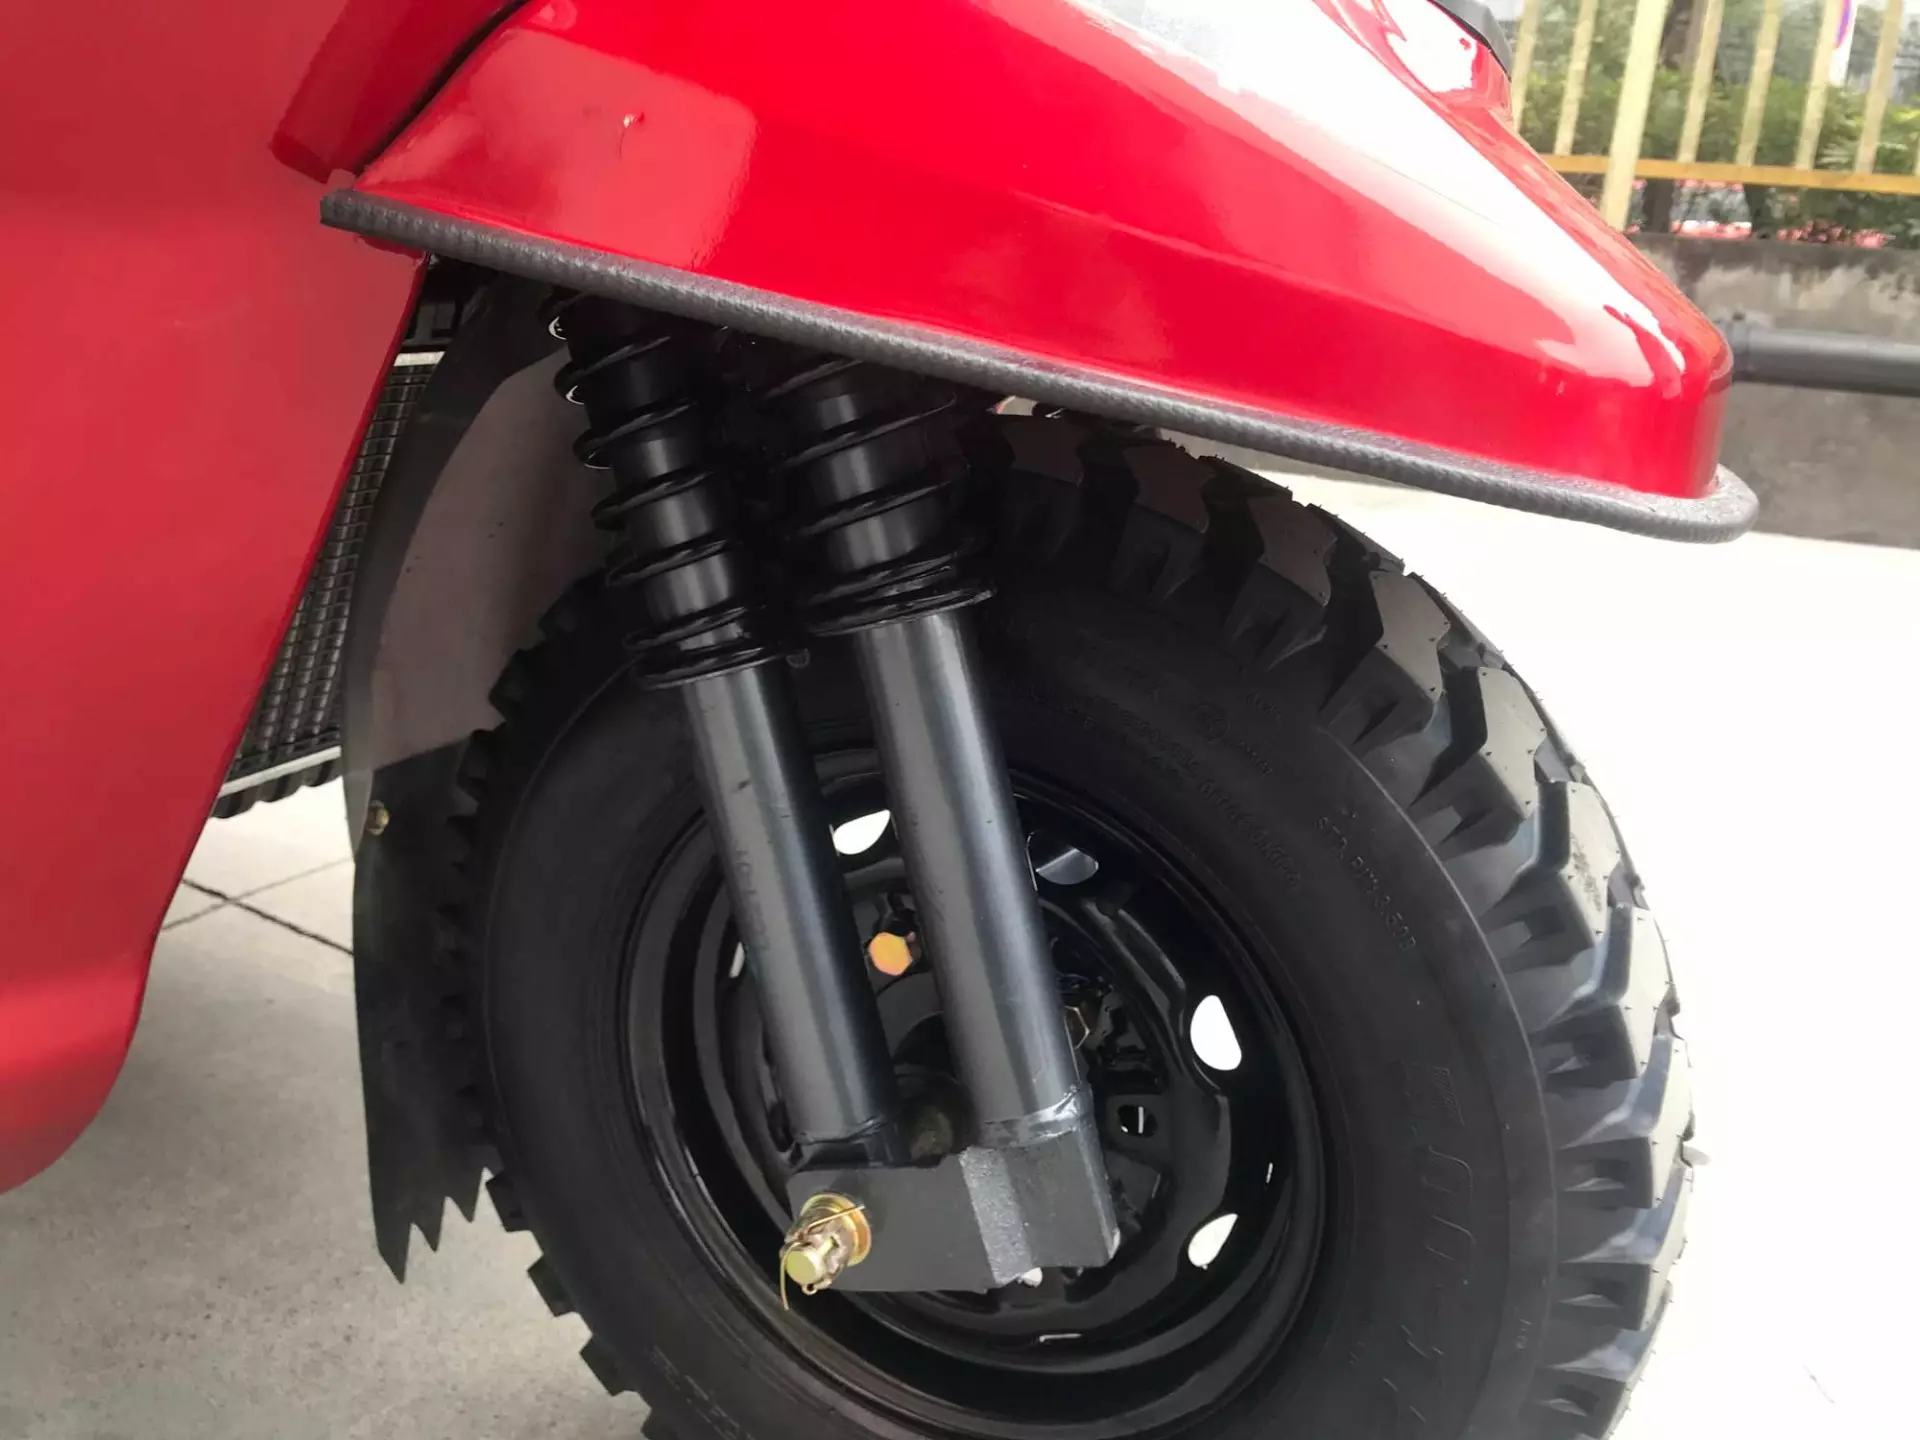 Fuel oil gasoline motor new 300cc zongshen engine 5 wheels cargo tricycle custom red body